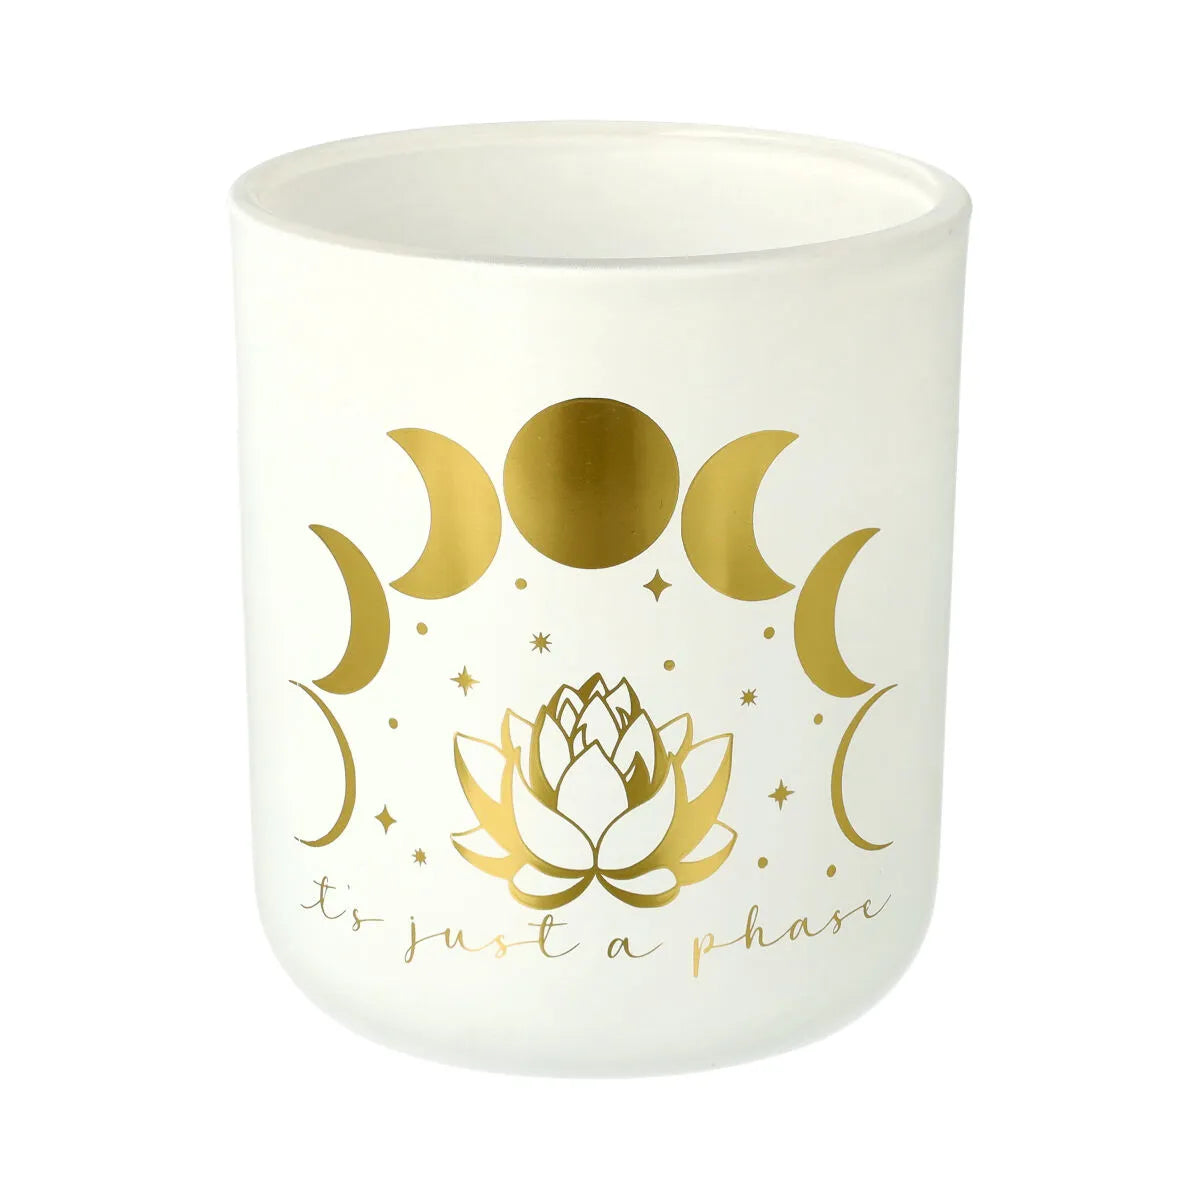 Coming Soon! The Serenity Candle Collection